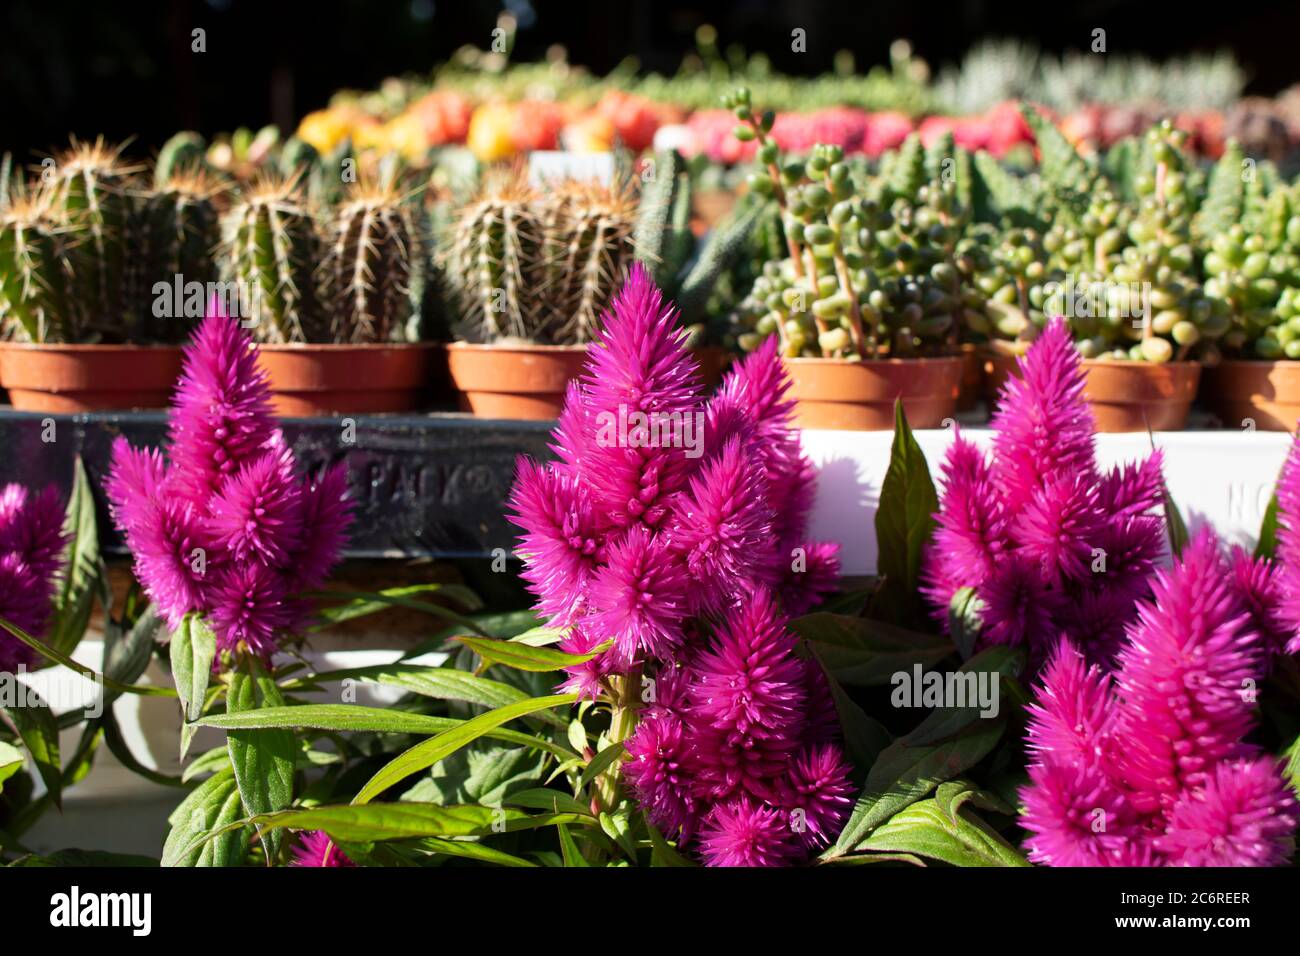 Celosia cristata.Crested Celosia The flowers are a bunch of flowers. Stock Photo